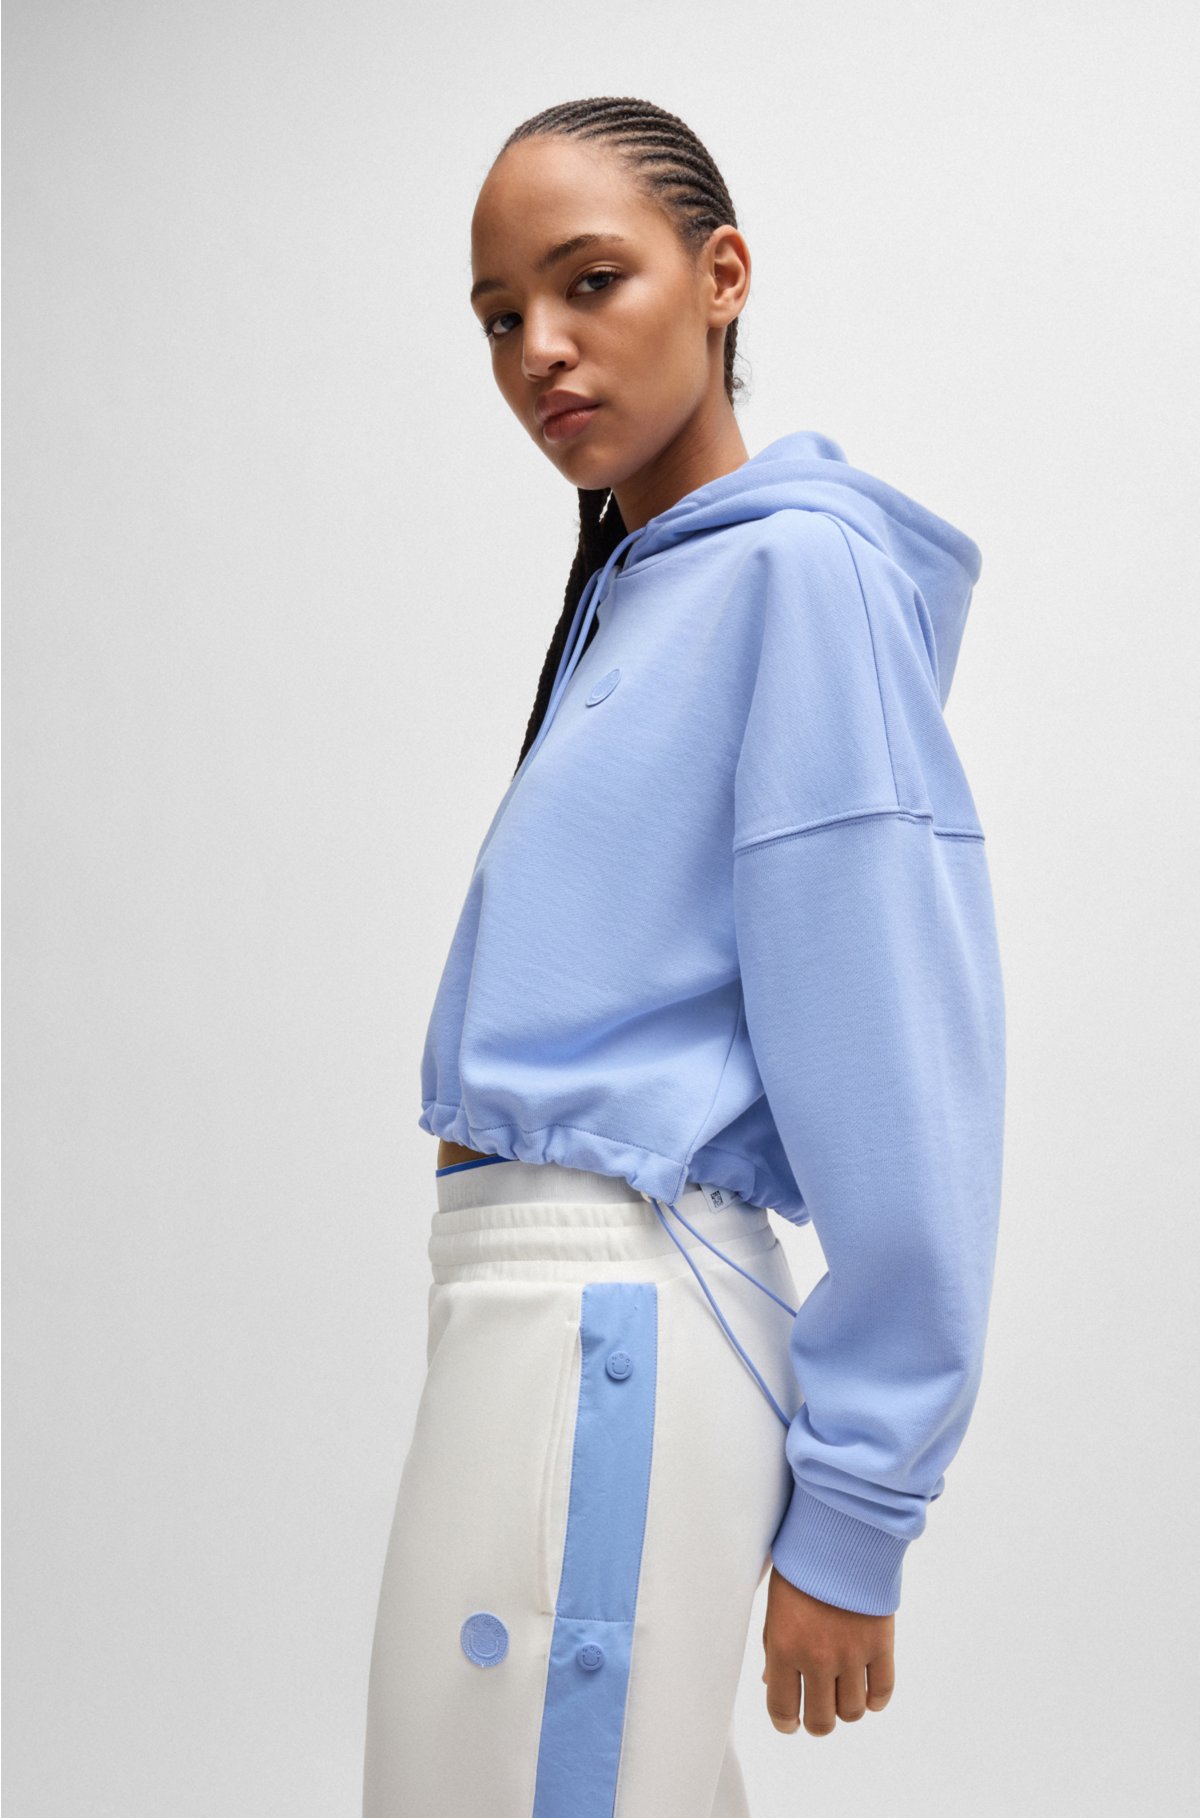 Cropped cotton-terry hoodie with Happy HUGO logo badge, Light Blue